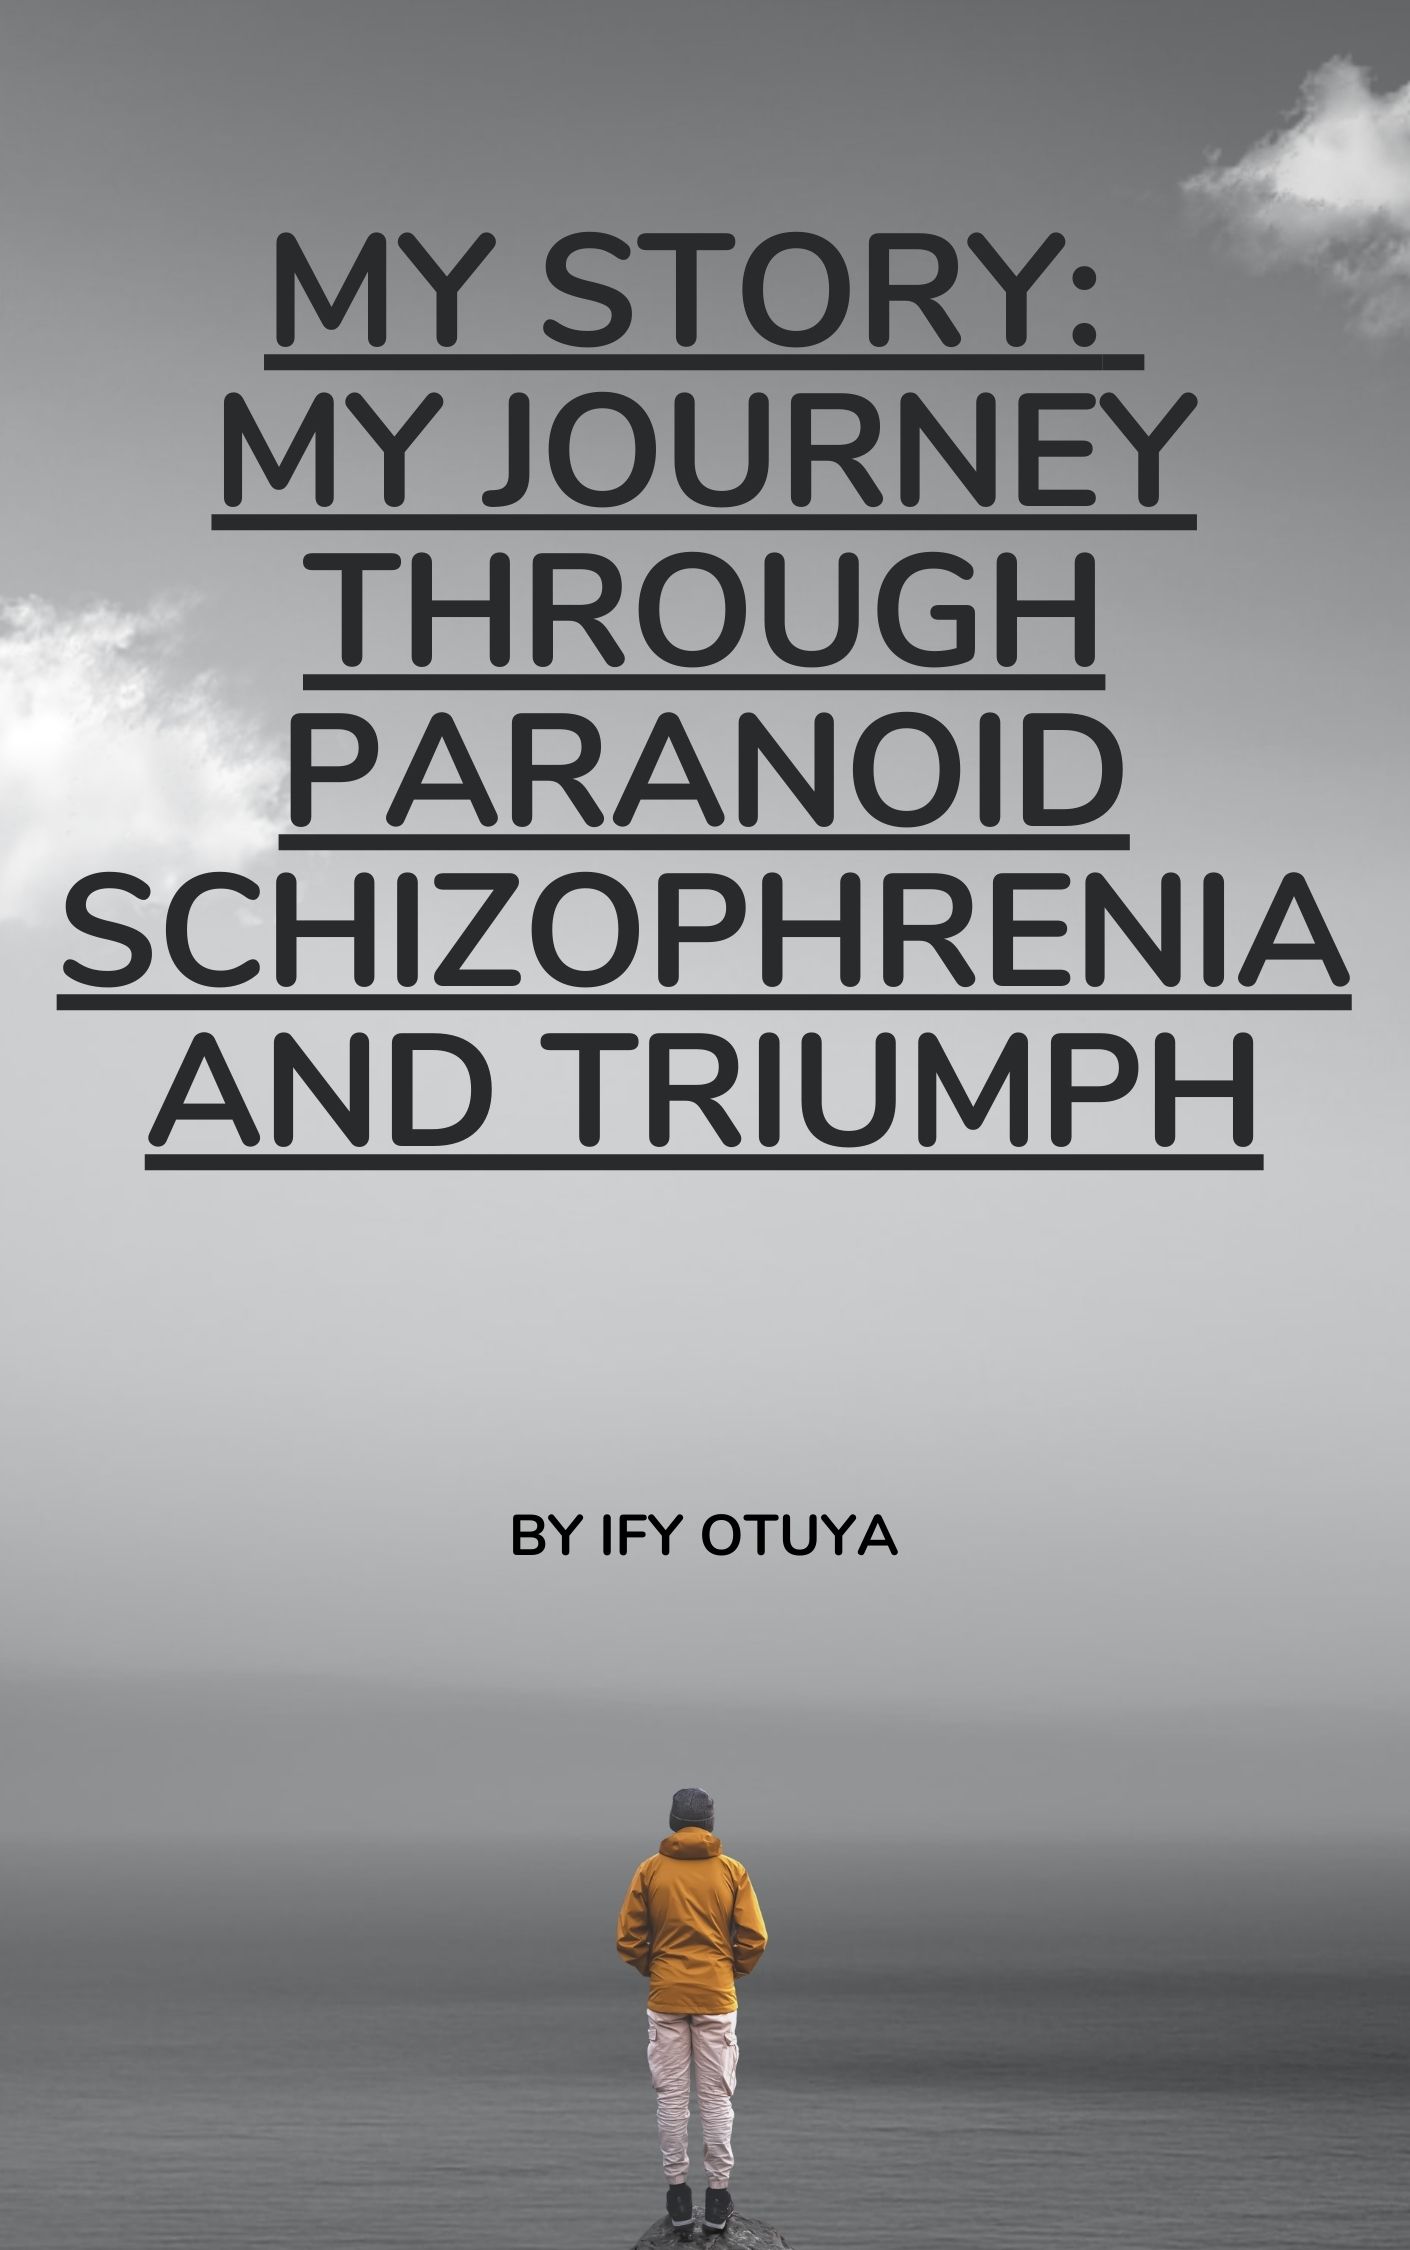 Cover of artwork by Ify Otuya for her story about her journey through paranoid schizophrenia and triumph.